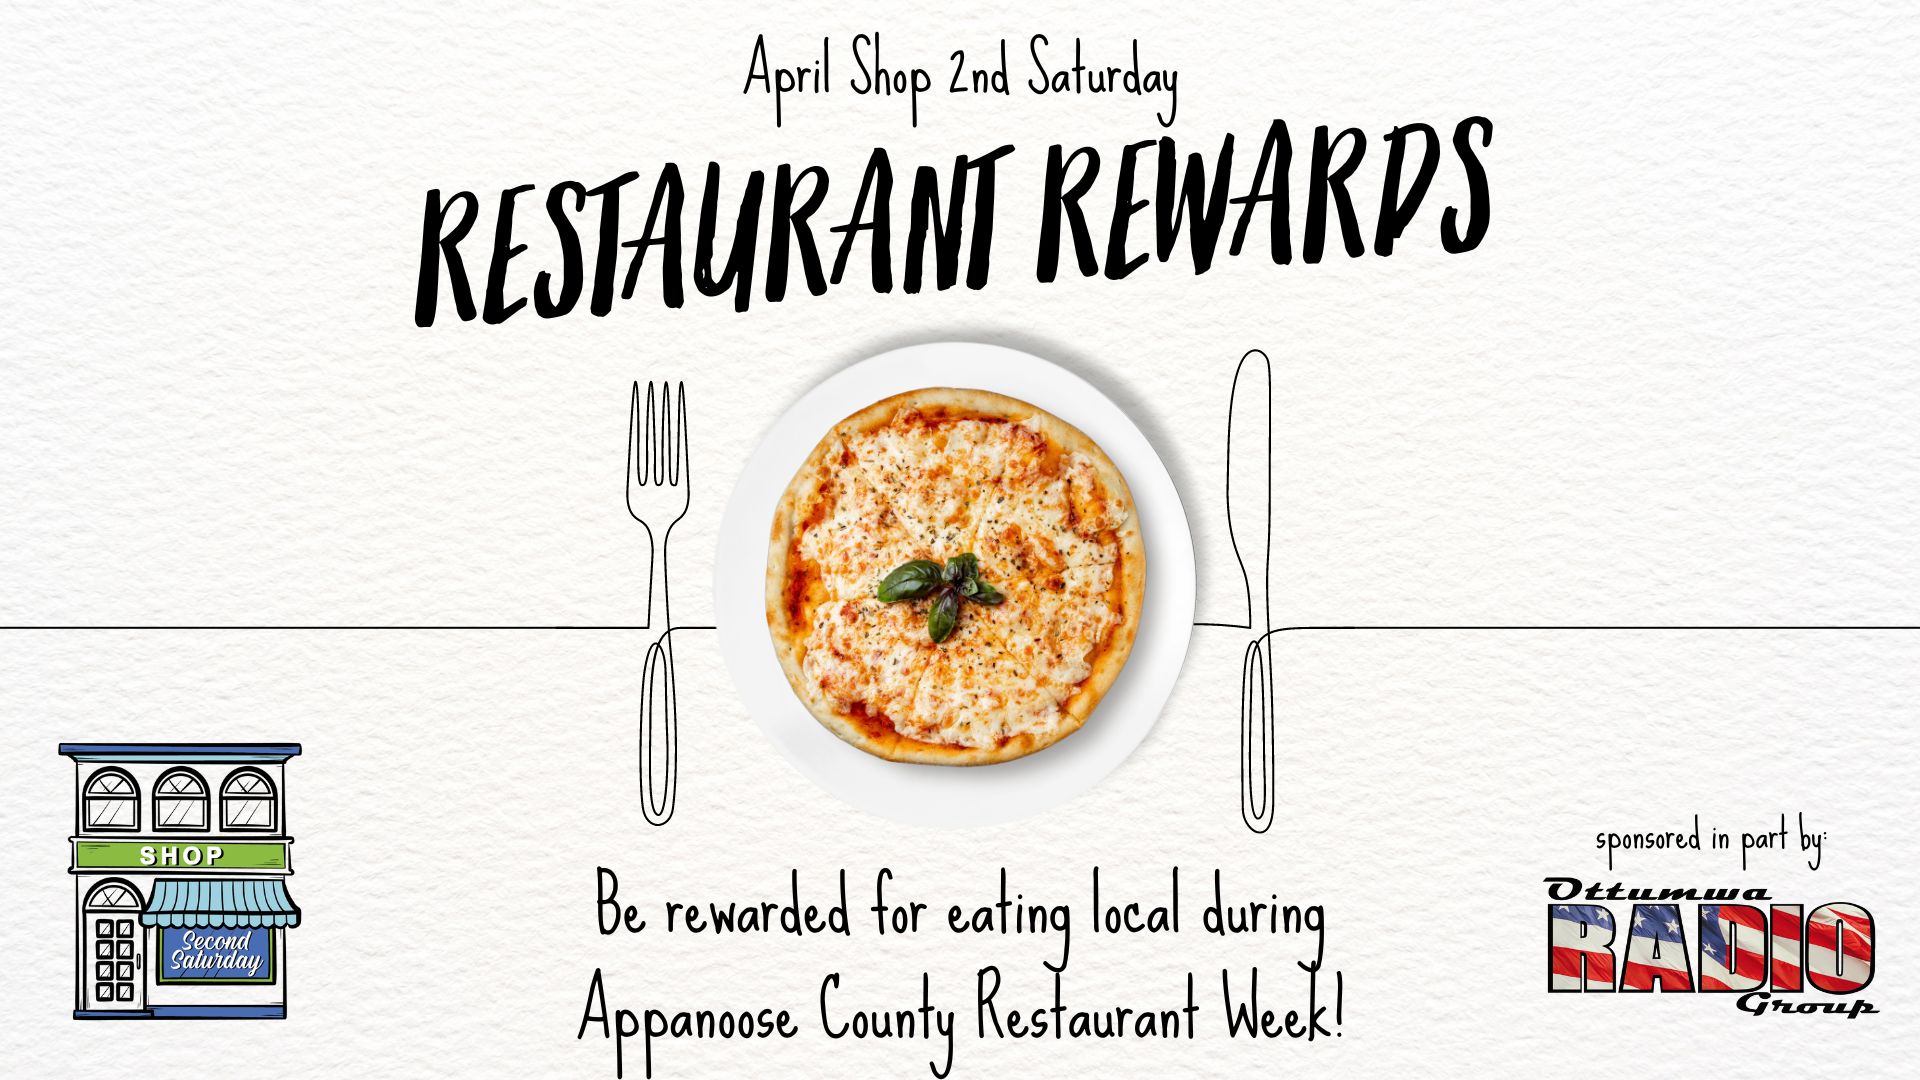 Restaurant Rewards Shop 2nd Saturday April 13th in Appanoose County